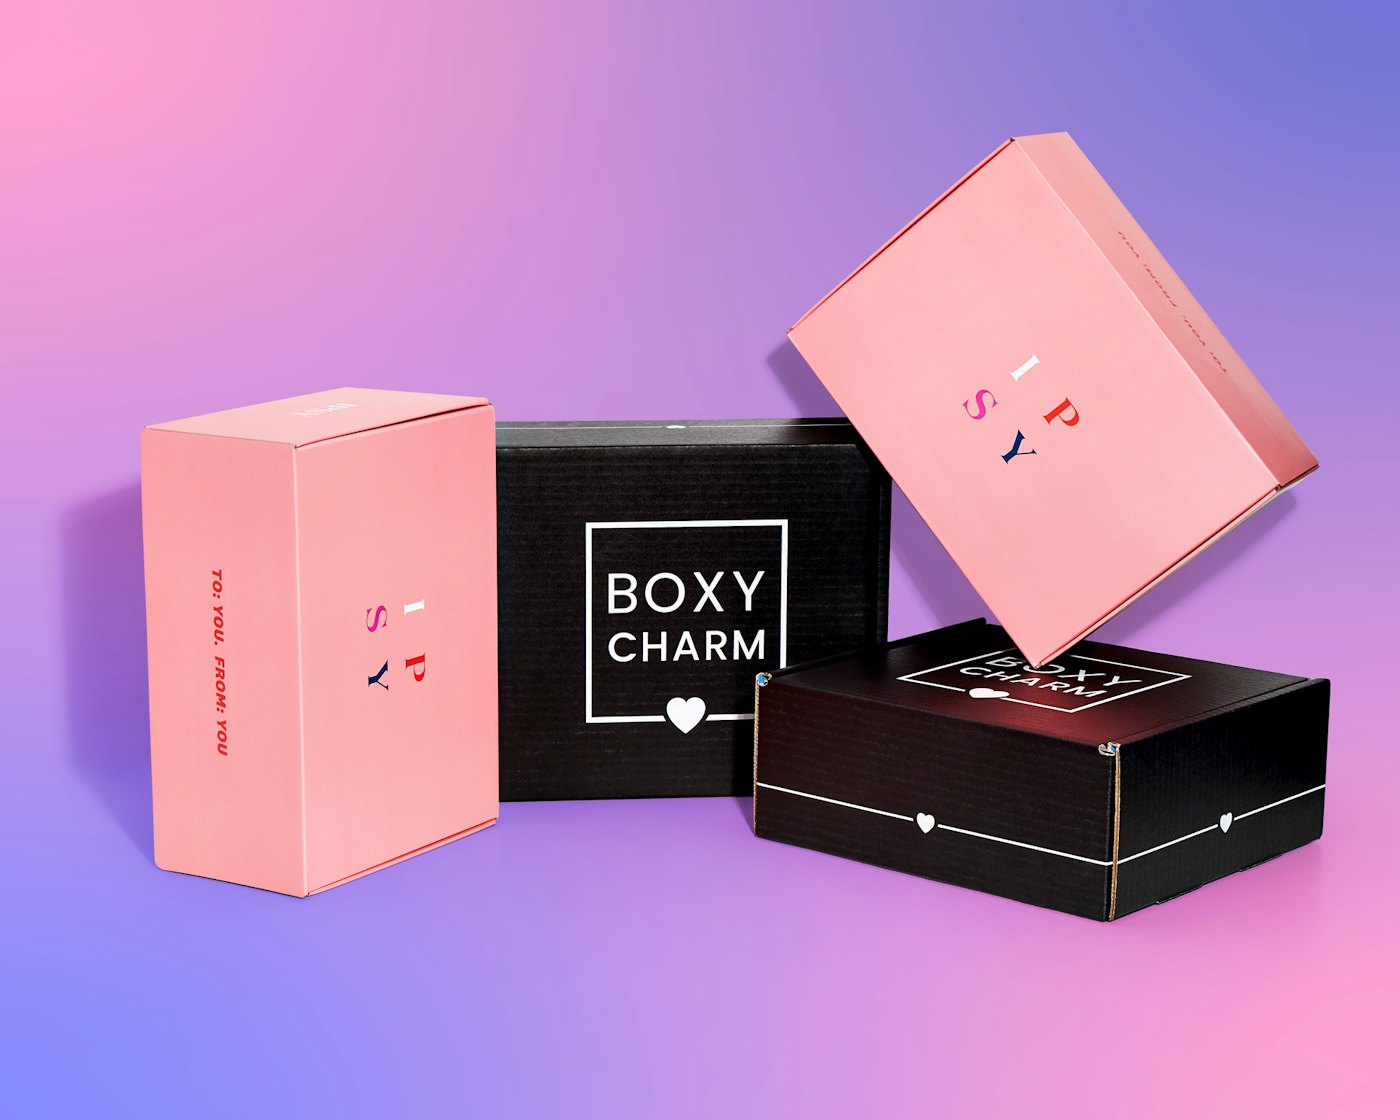 Ipsy x BoxyCharm Join Forces Under Ipsy Umbrella Global Cosmetic Industry